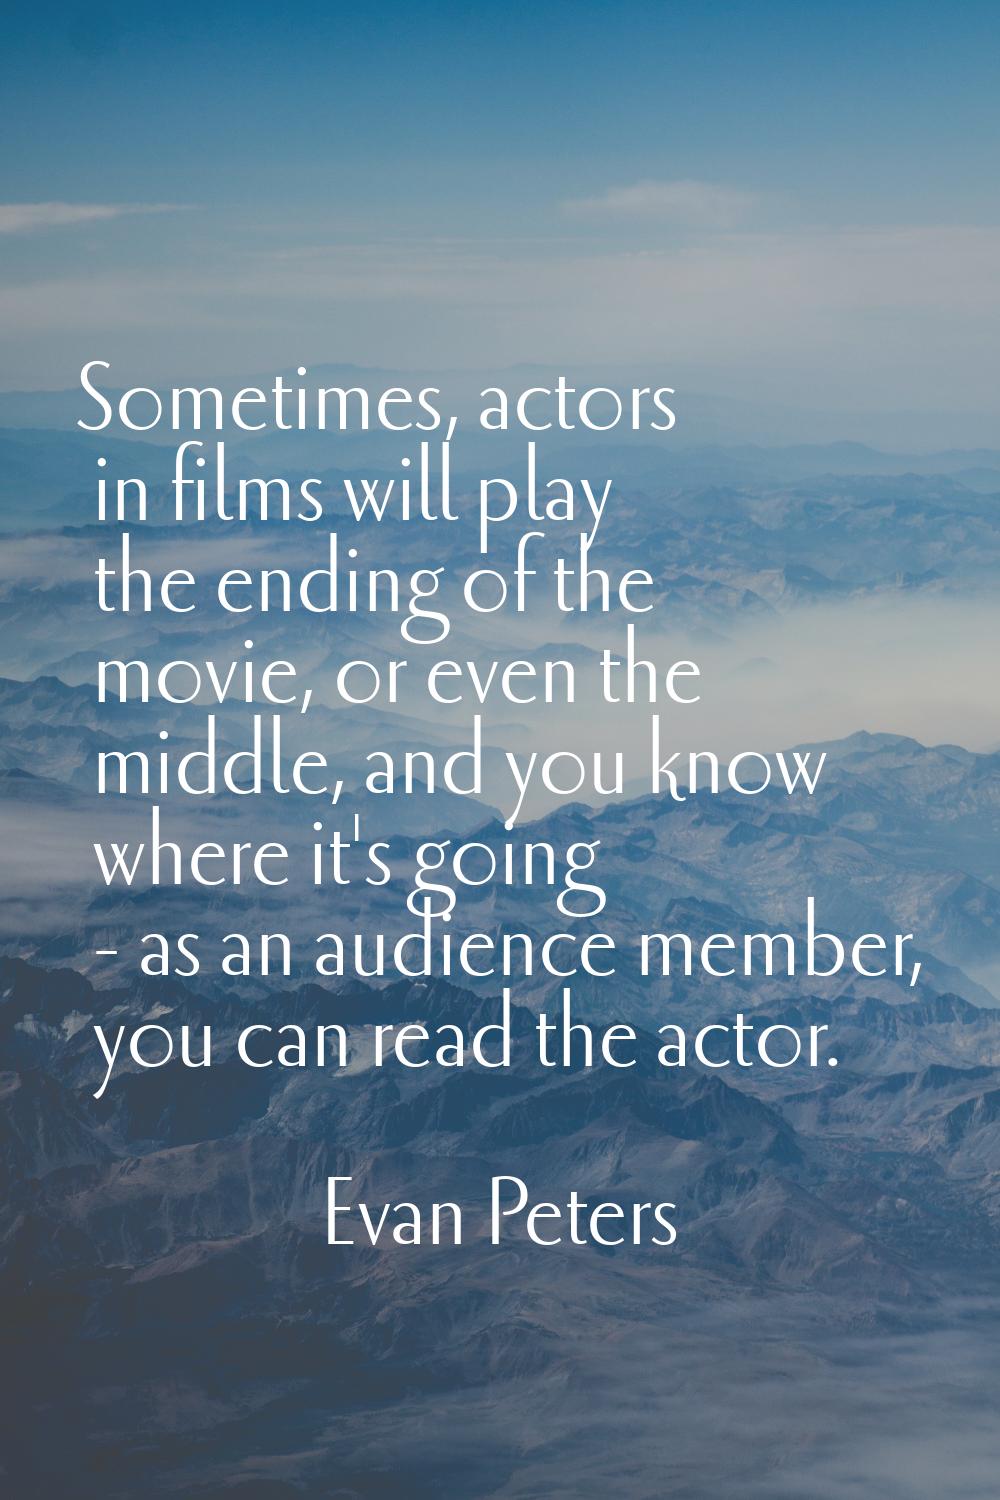 Sometimes, actors in films will play the ending of the movie, or even the middle, and you know wher